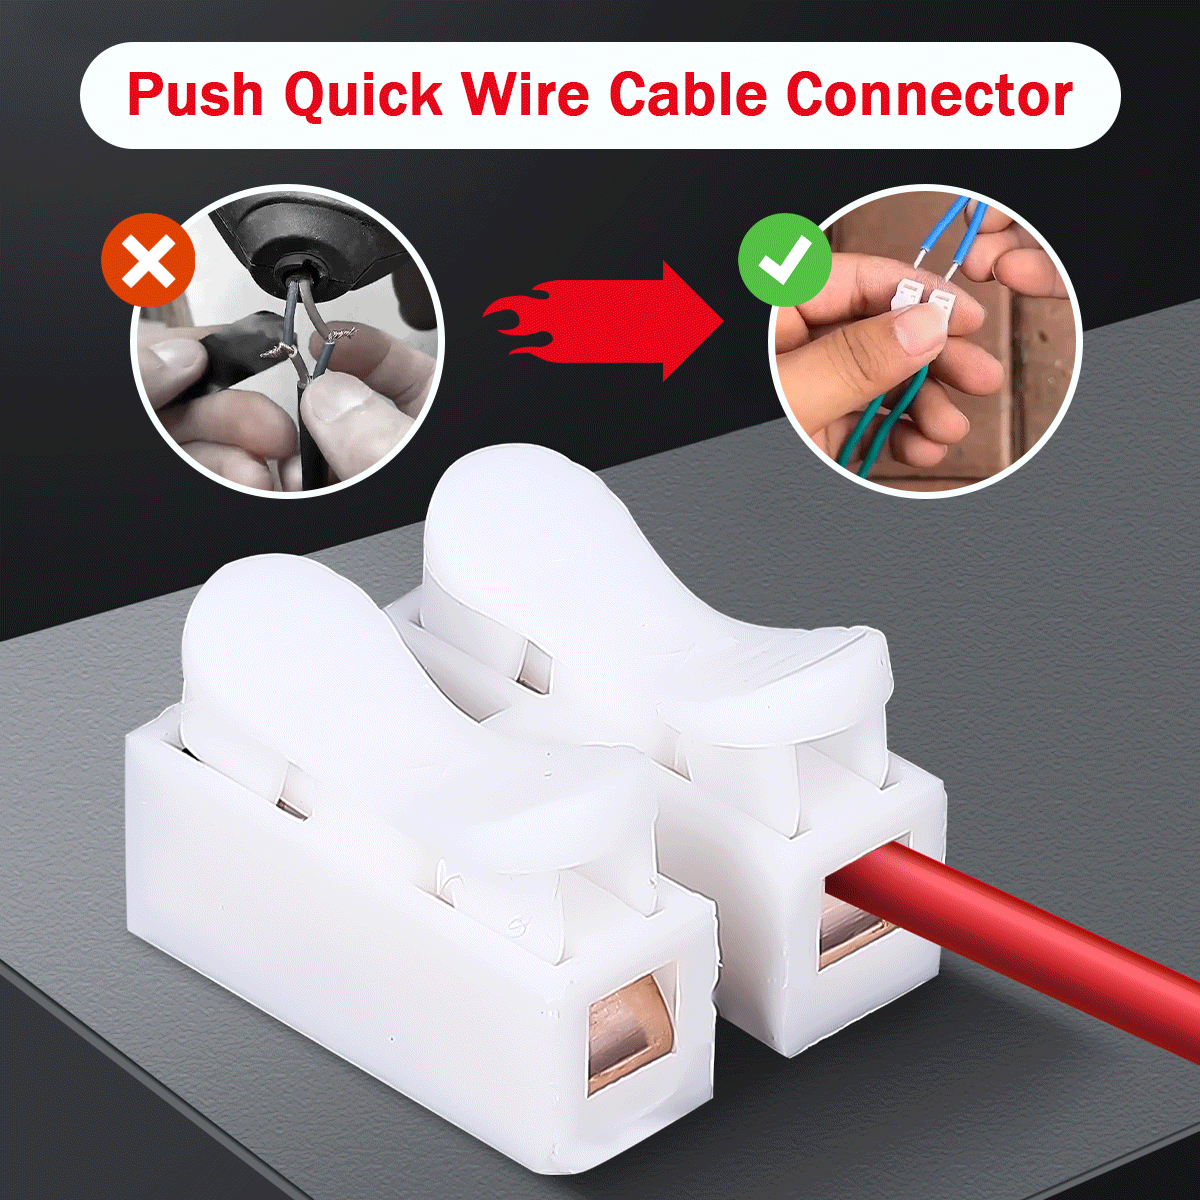 Push Quick Wire Cable Connector FAEVEZ™- Home Devices